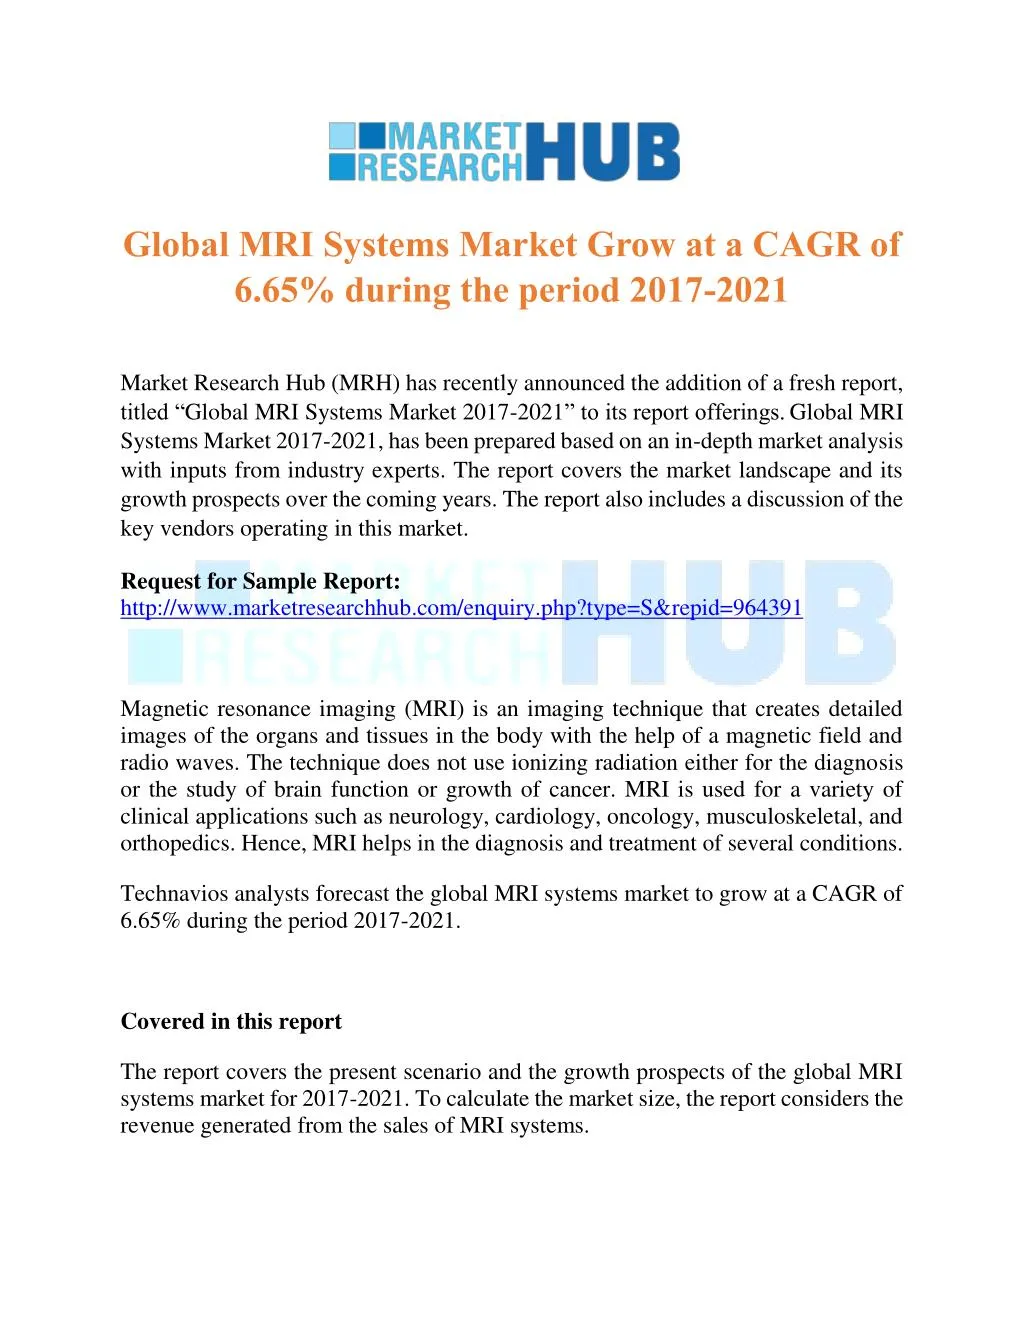 global mri systems market grow at a cagr